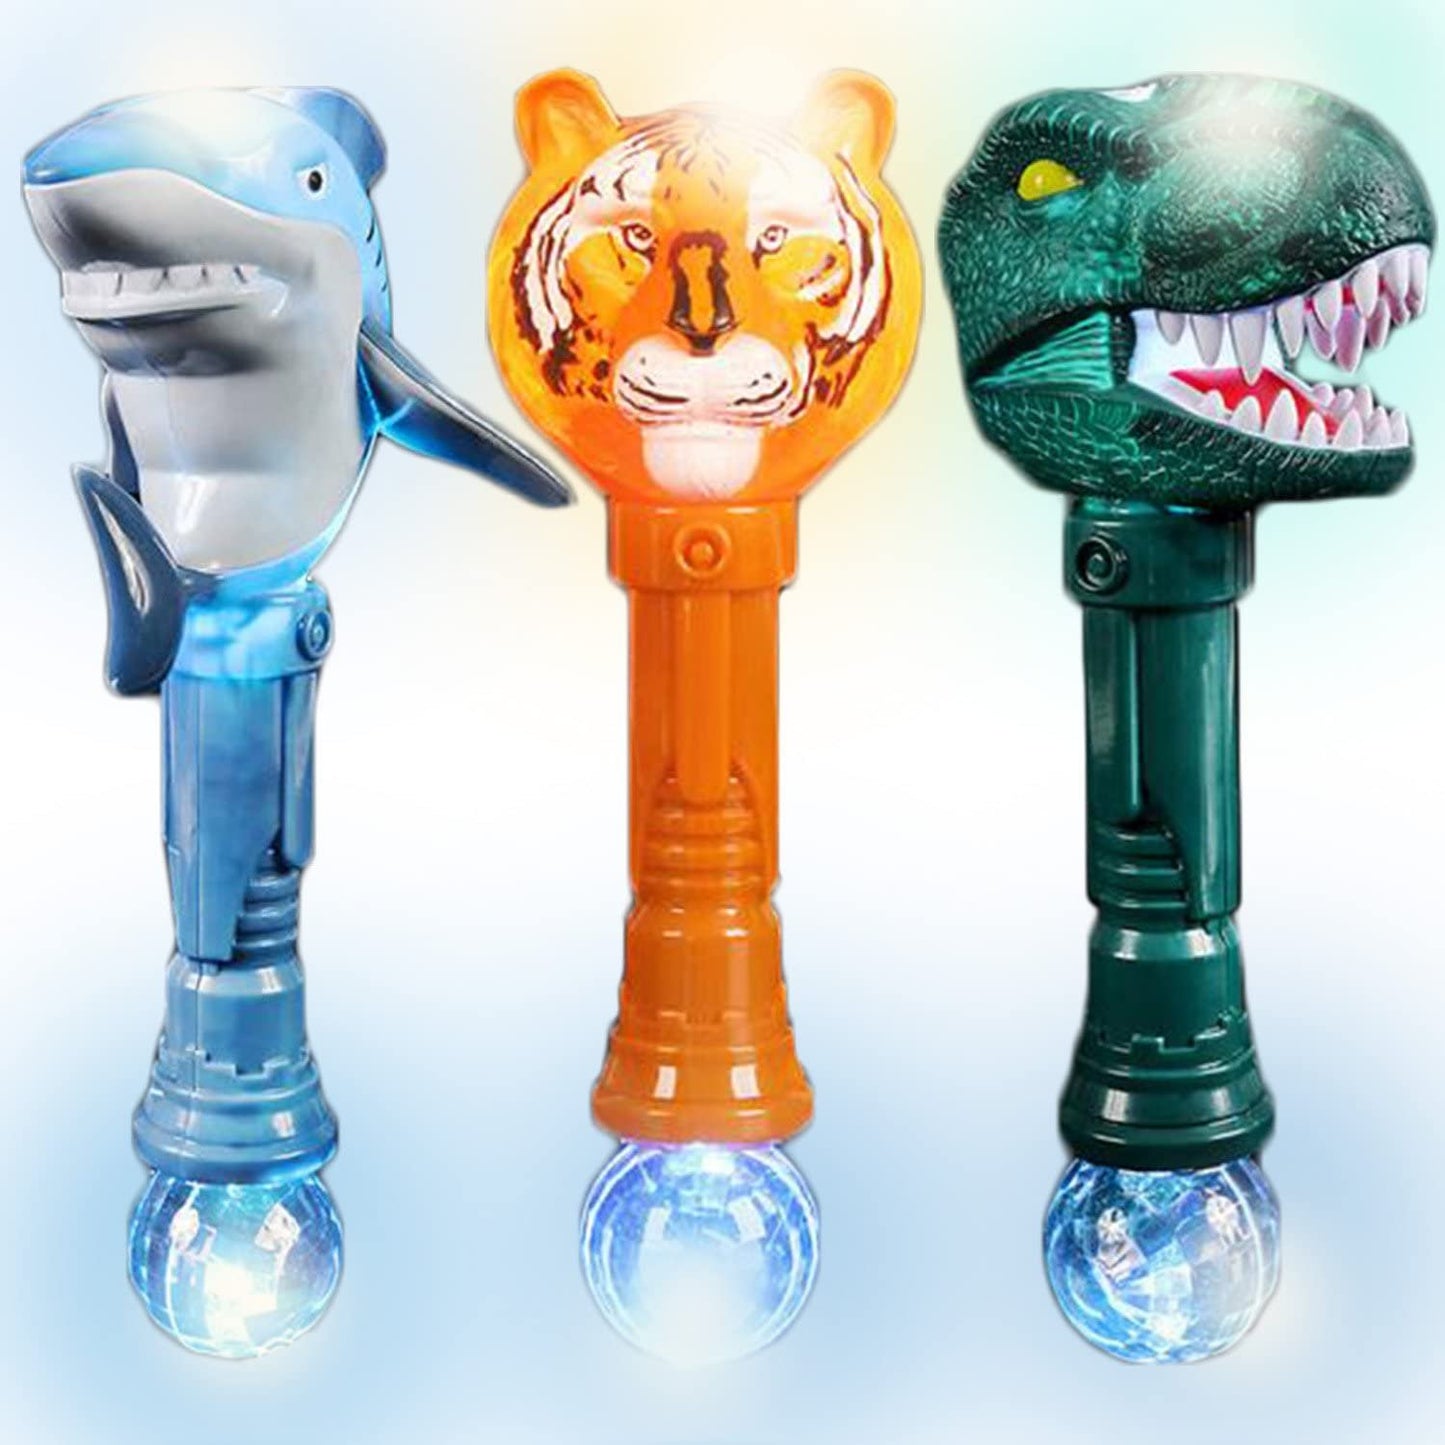 ArtCreativity Ultra Fun Light Up Wand Set of 3 Includes T-Rex, Tiger, and Shark Wands - Beautiful Art Detailing Plastic - LED Party Favors, Gift for Kids - Batteries Included